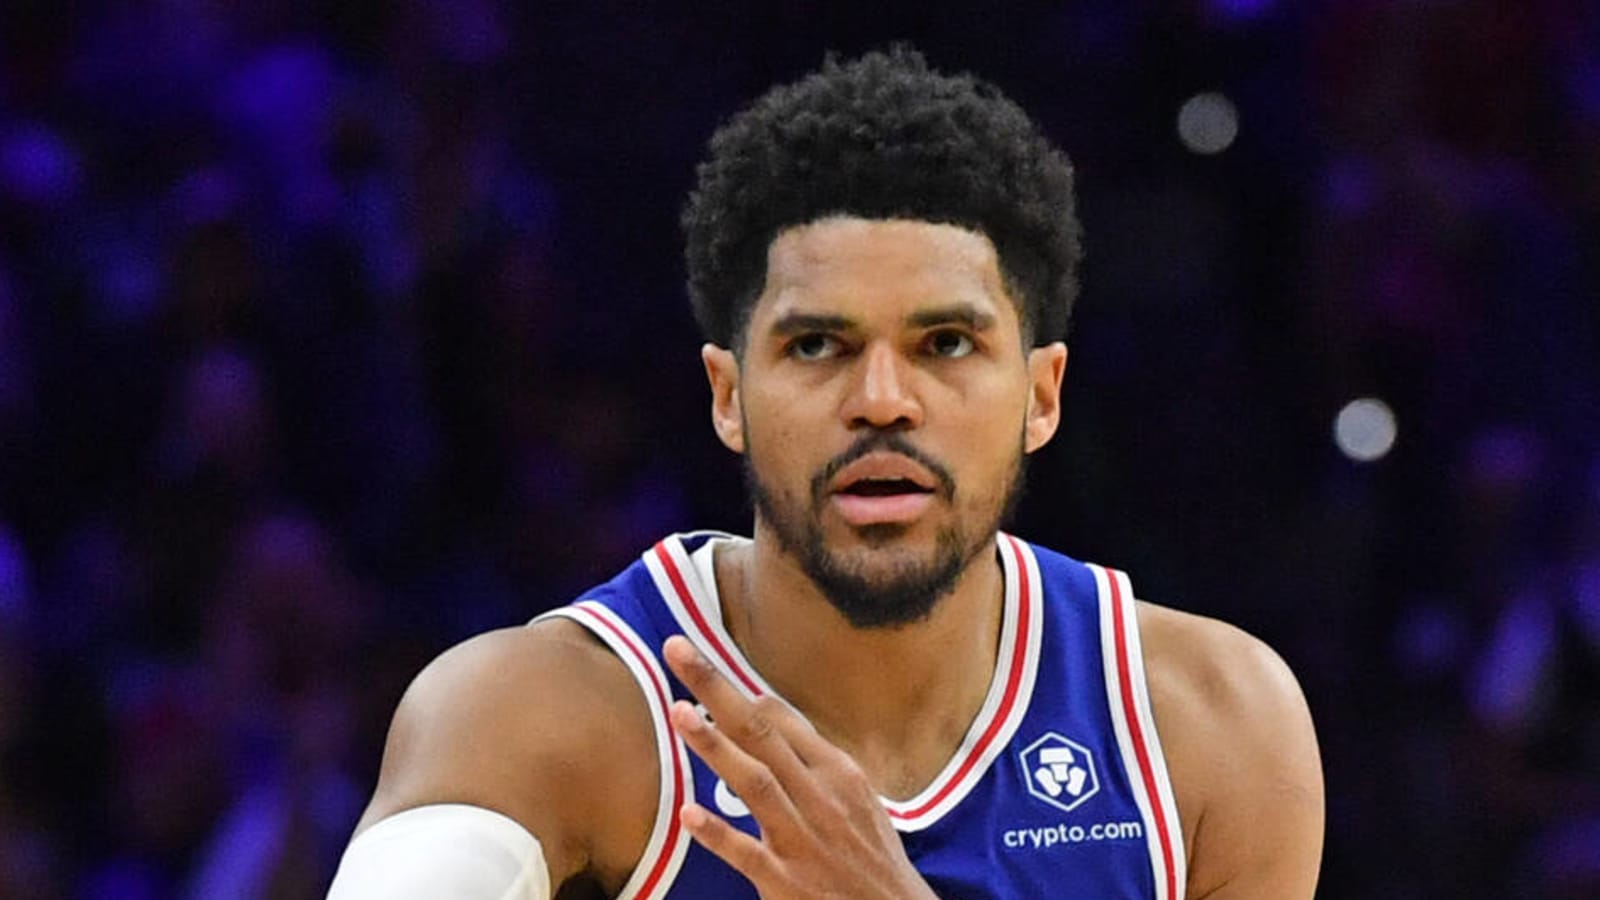 Sixers star makes cookies go viral while calling out 'casuals'